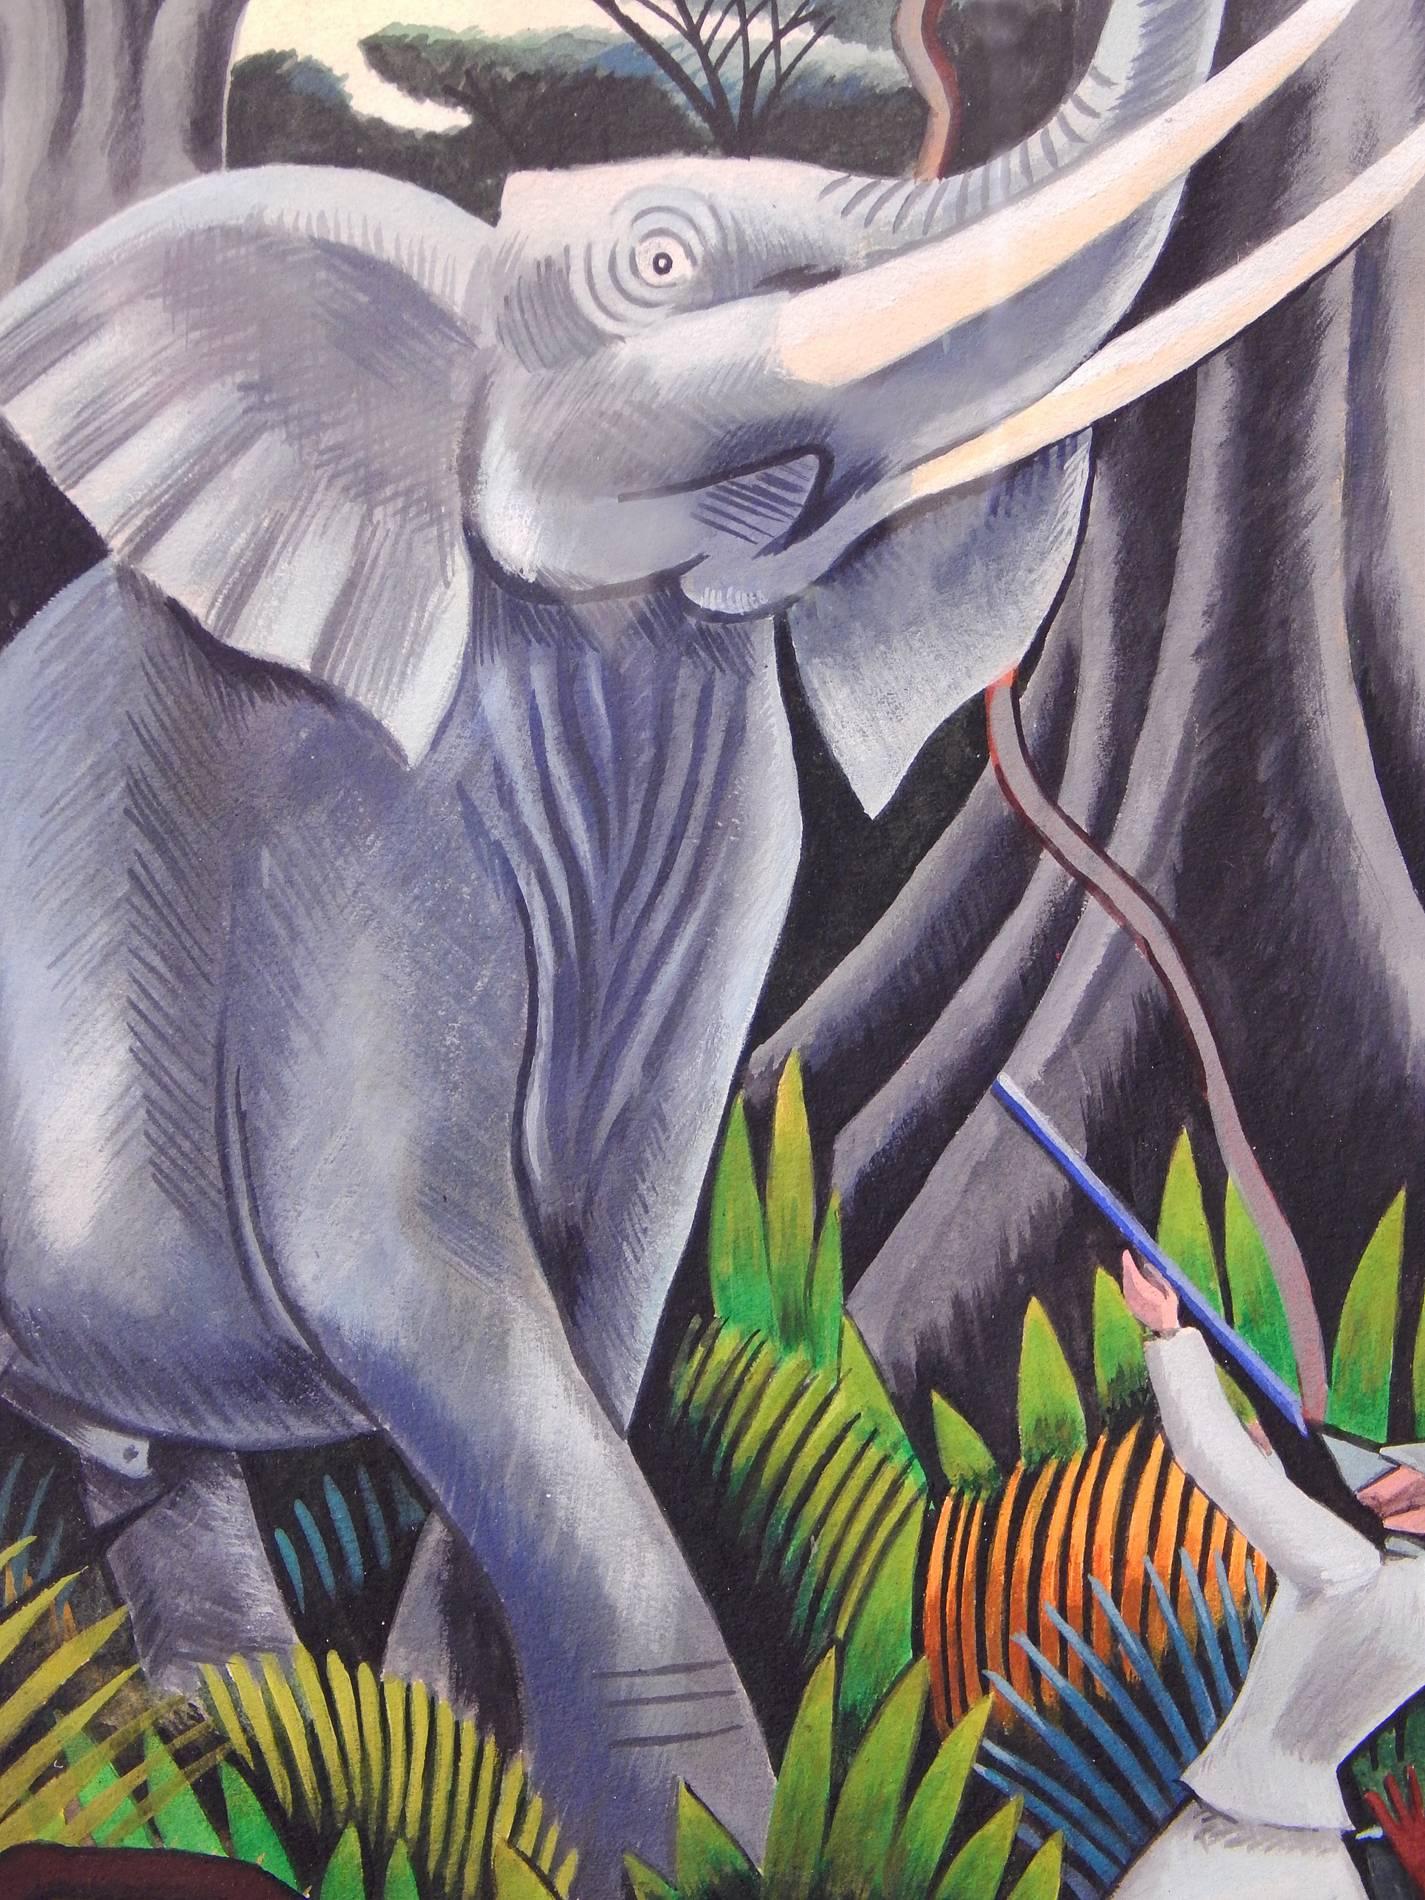 Painted by one of those rare artists who successfully straddled the line between satire, caricature and Fine art, this depiction of a safari hunter confronting a magnificent elephant in the African jungle was created by Miguel Covarrubias. The